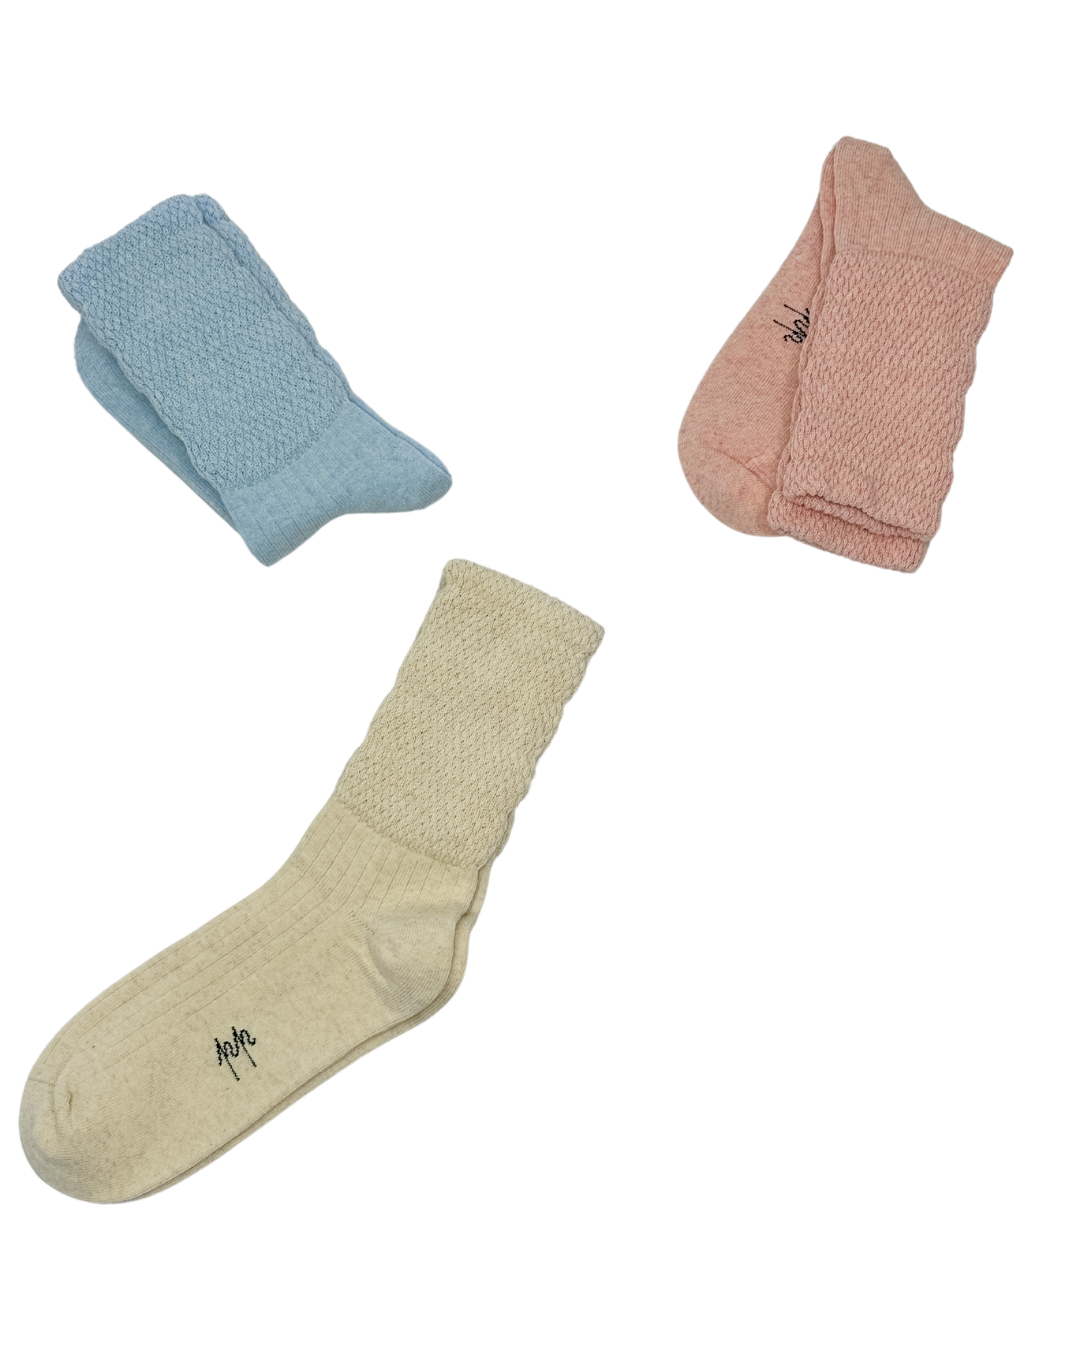 Super Soft Ankle socks, Women's 3 pairs/Pack